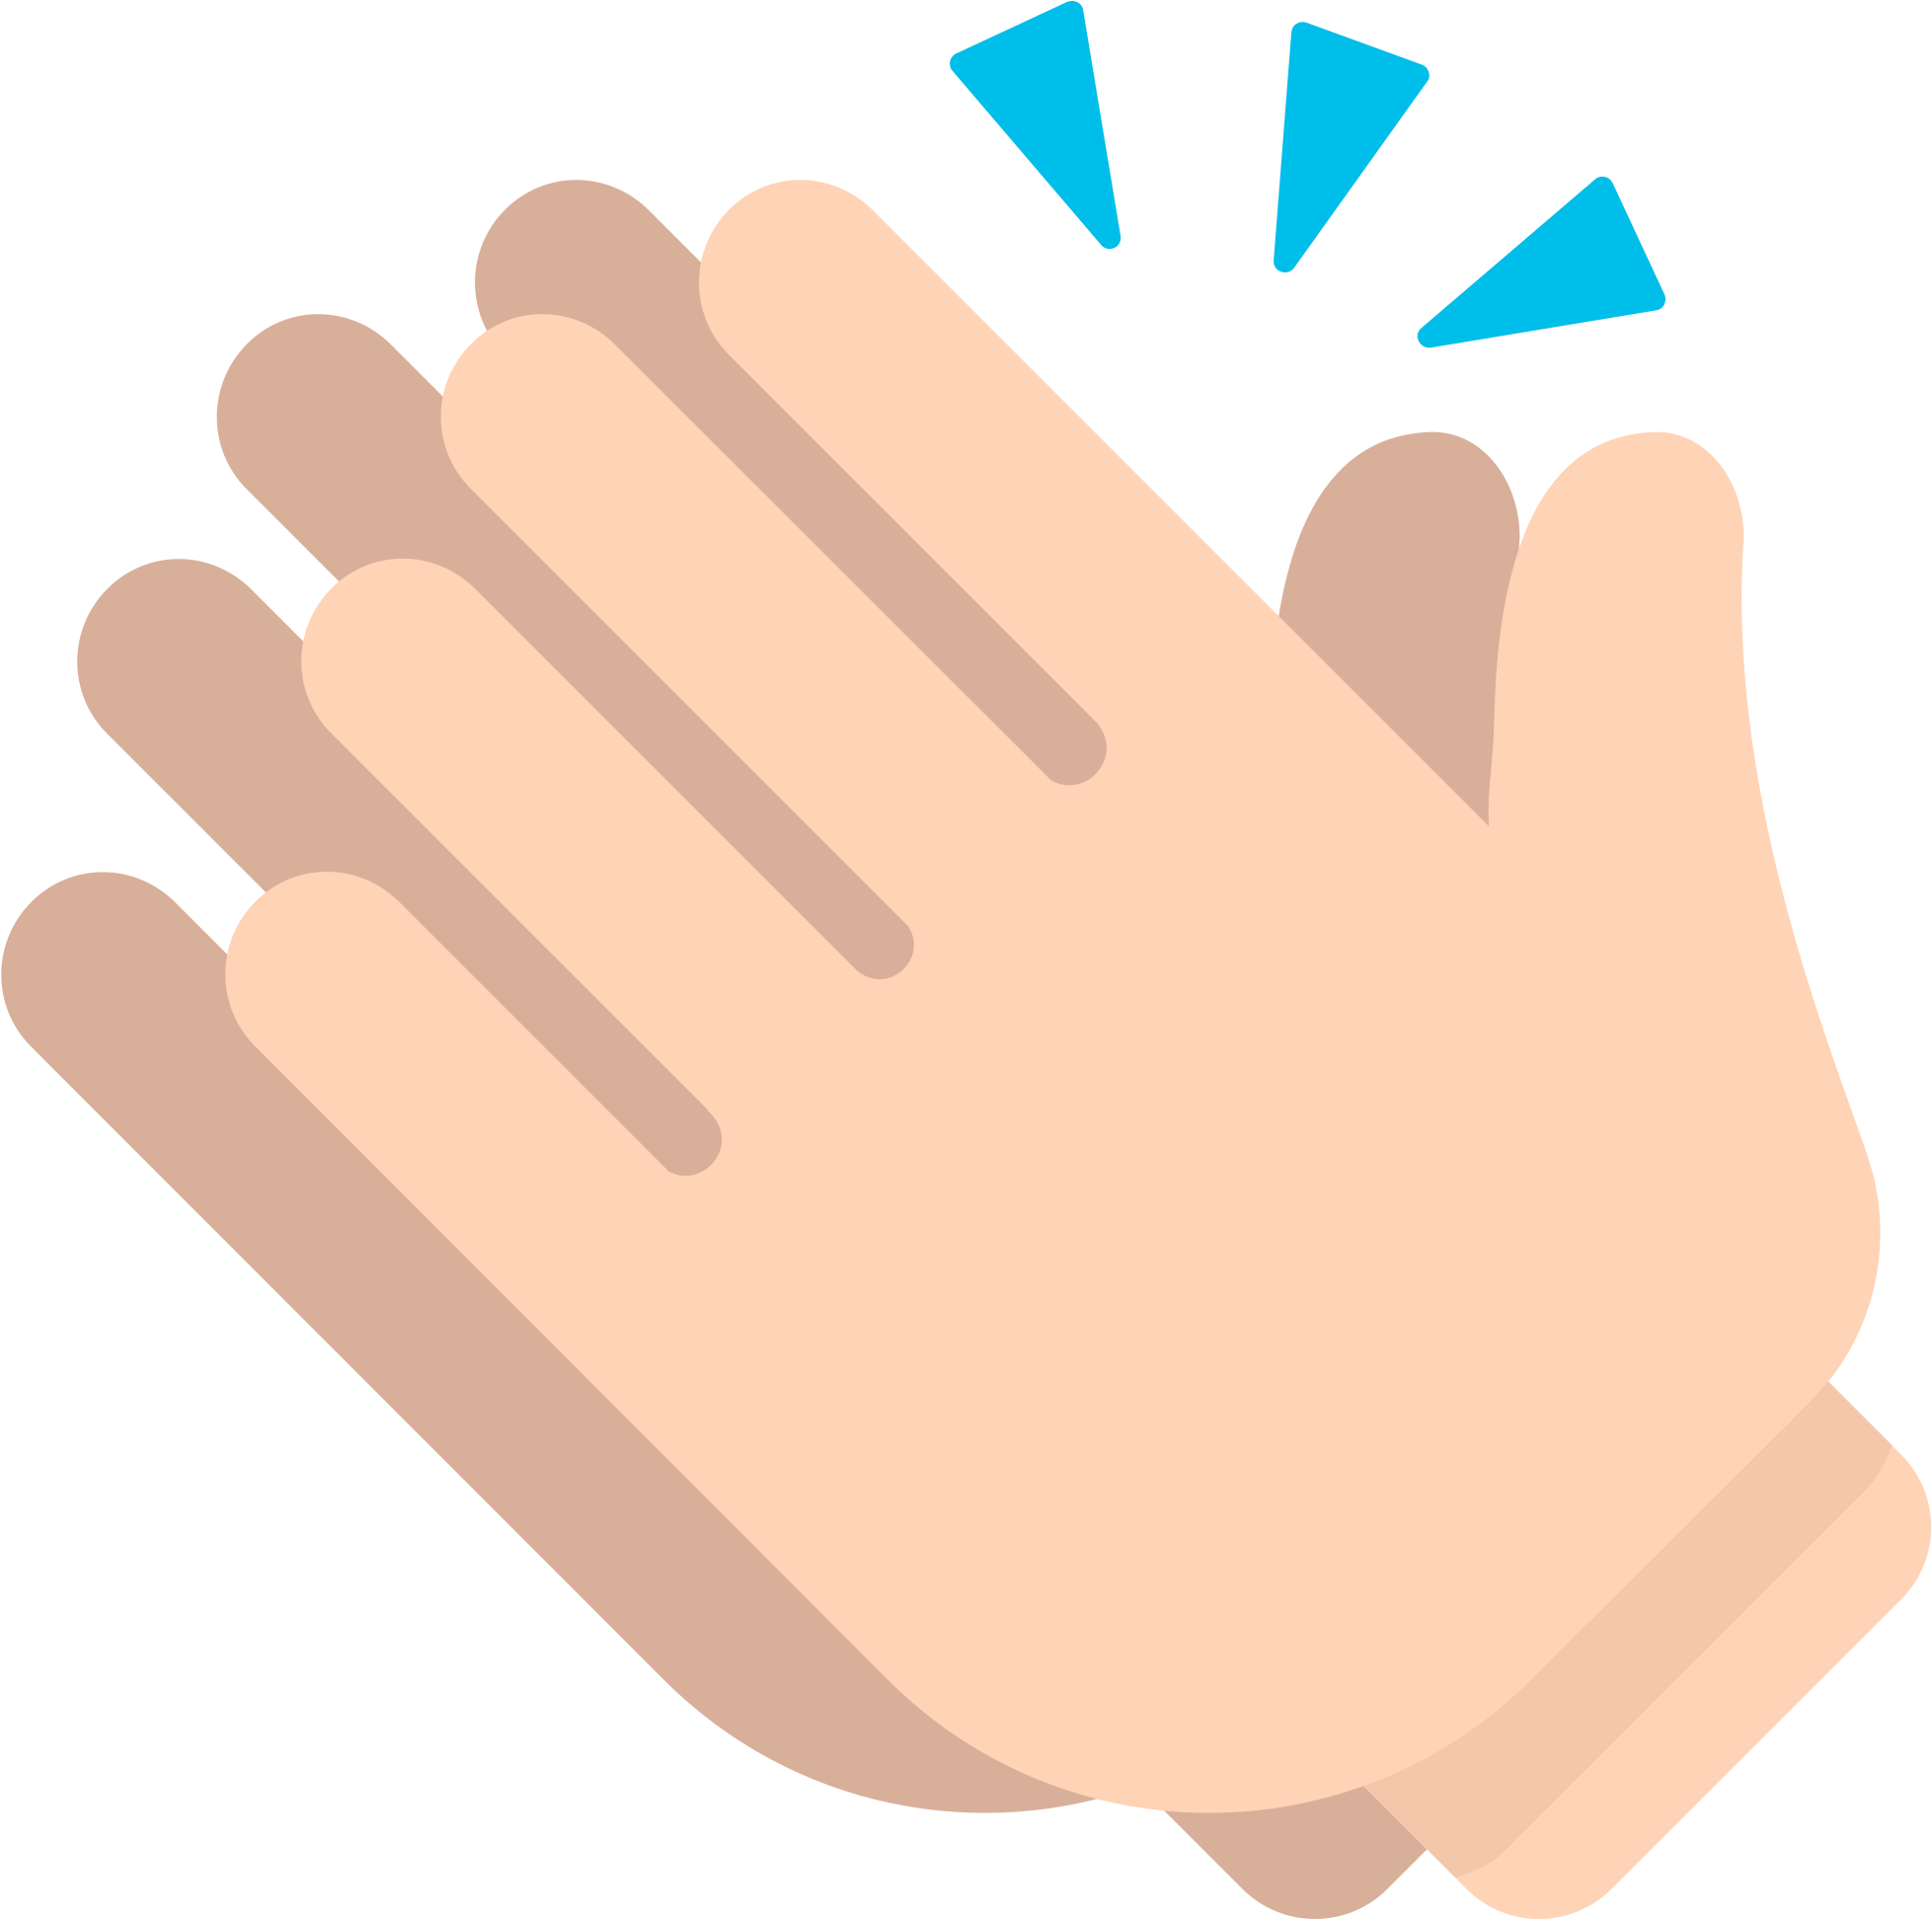 Clapping_ Hands_ Emoji_ Illustration.png PNG